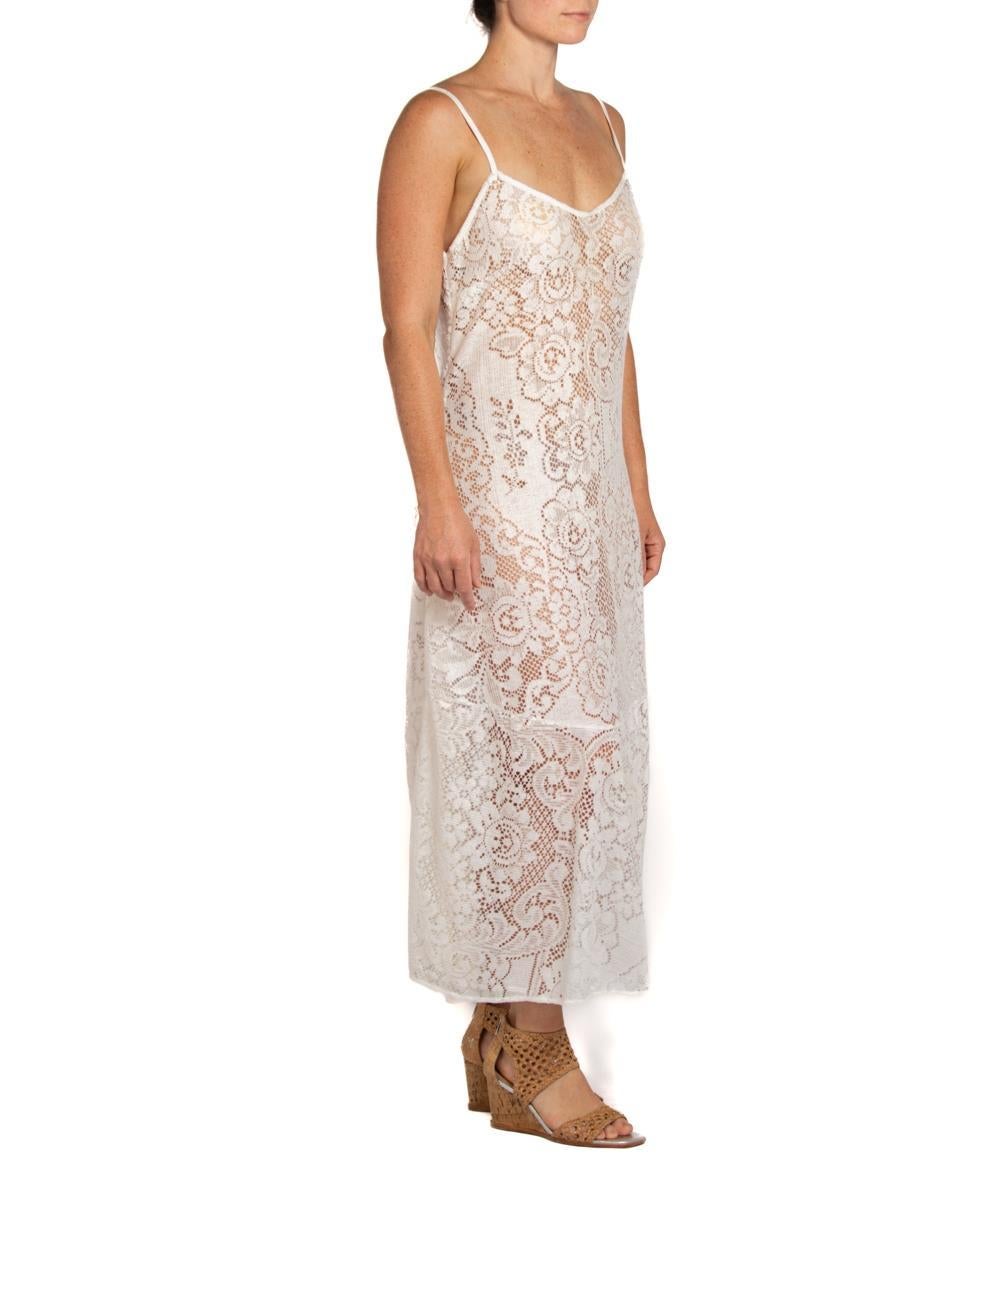 Morphew Collection White Floral Poly/Nylon Lace From 1970'S Curtain Dress In Excellent Condition For Sale In New York, NY